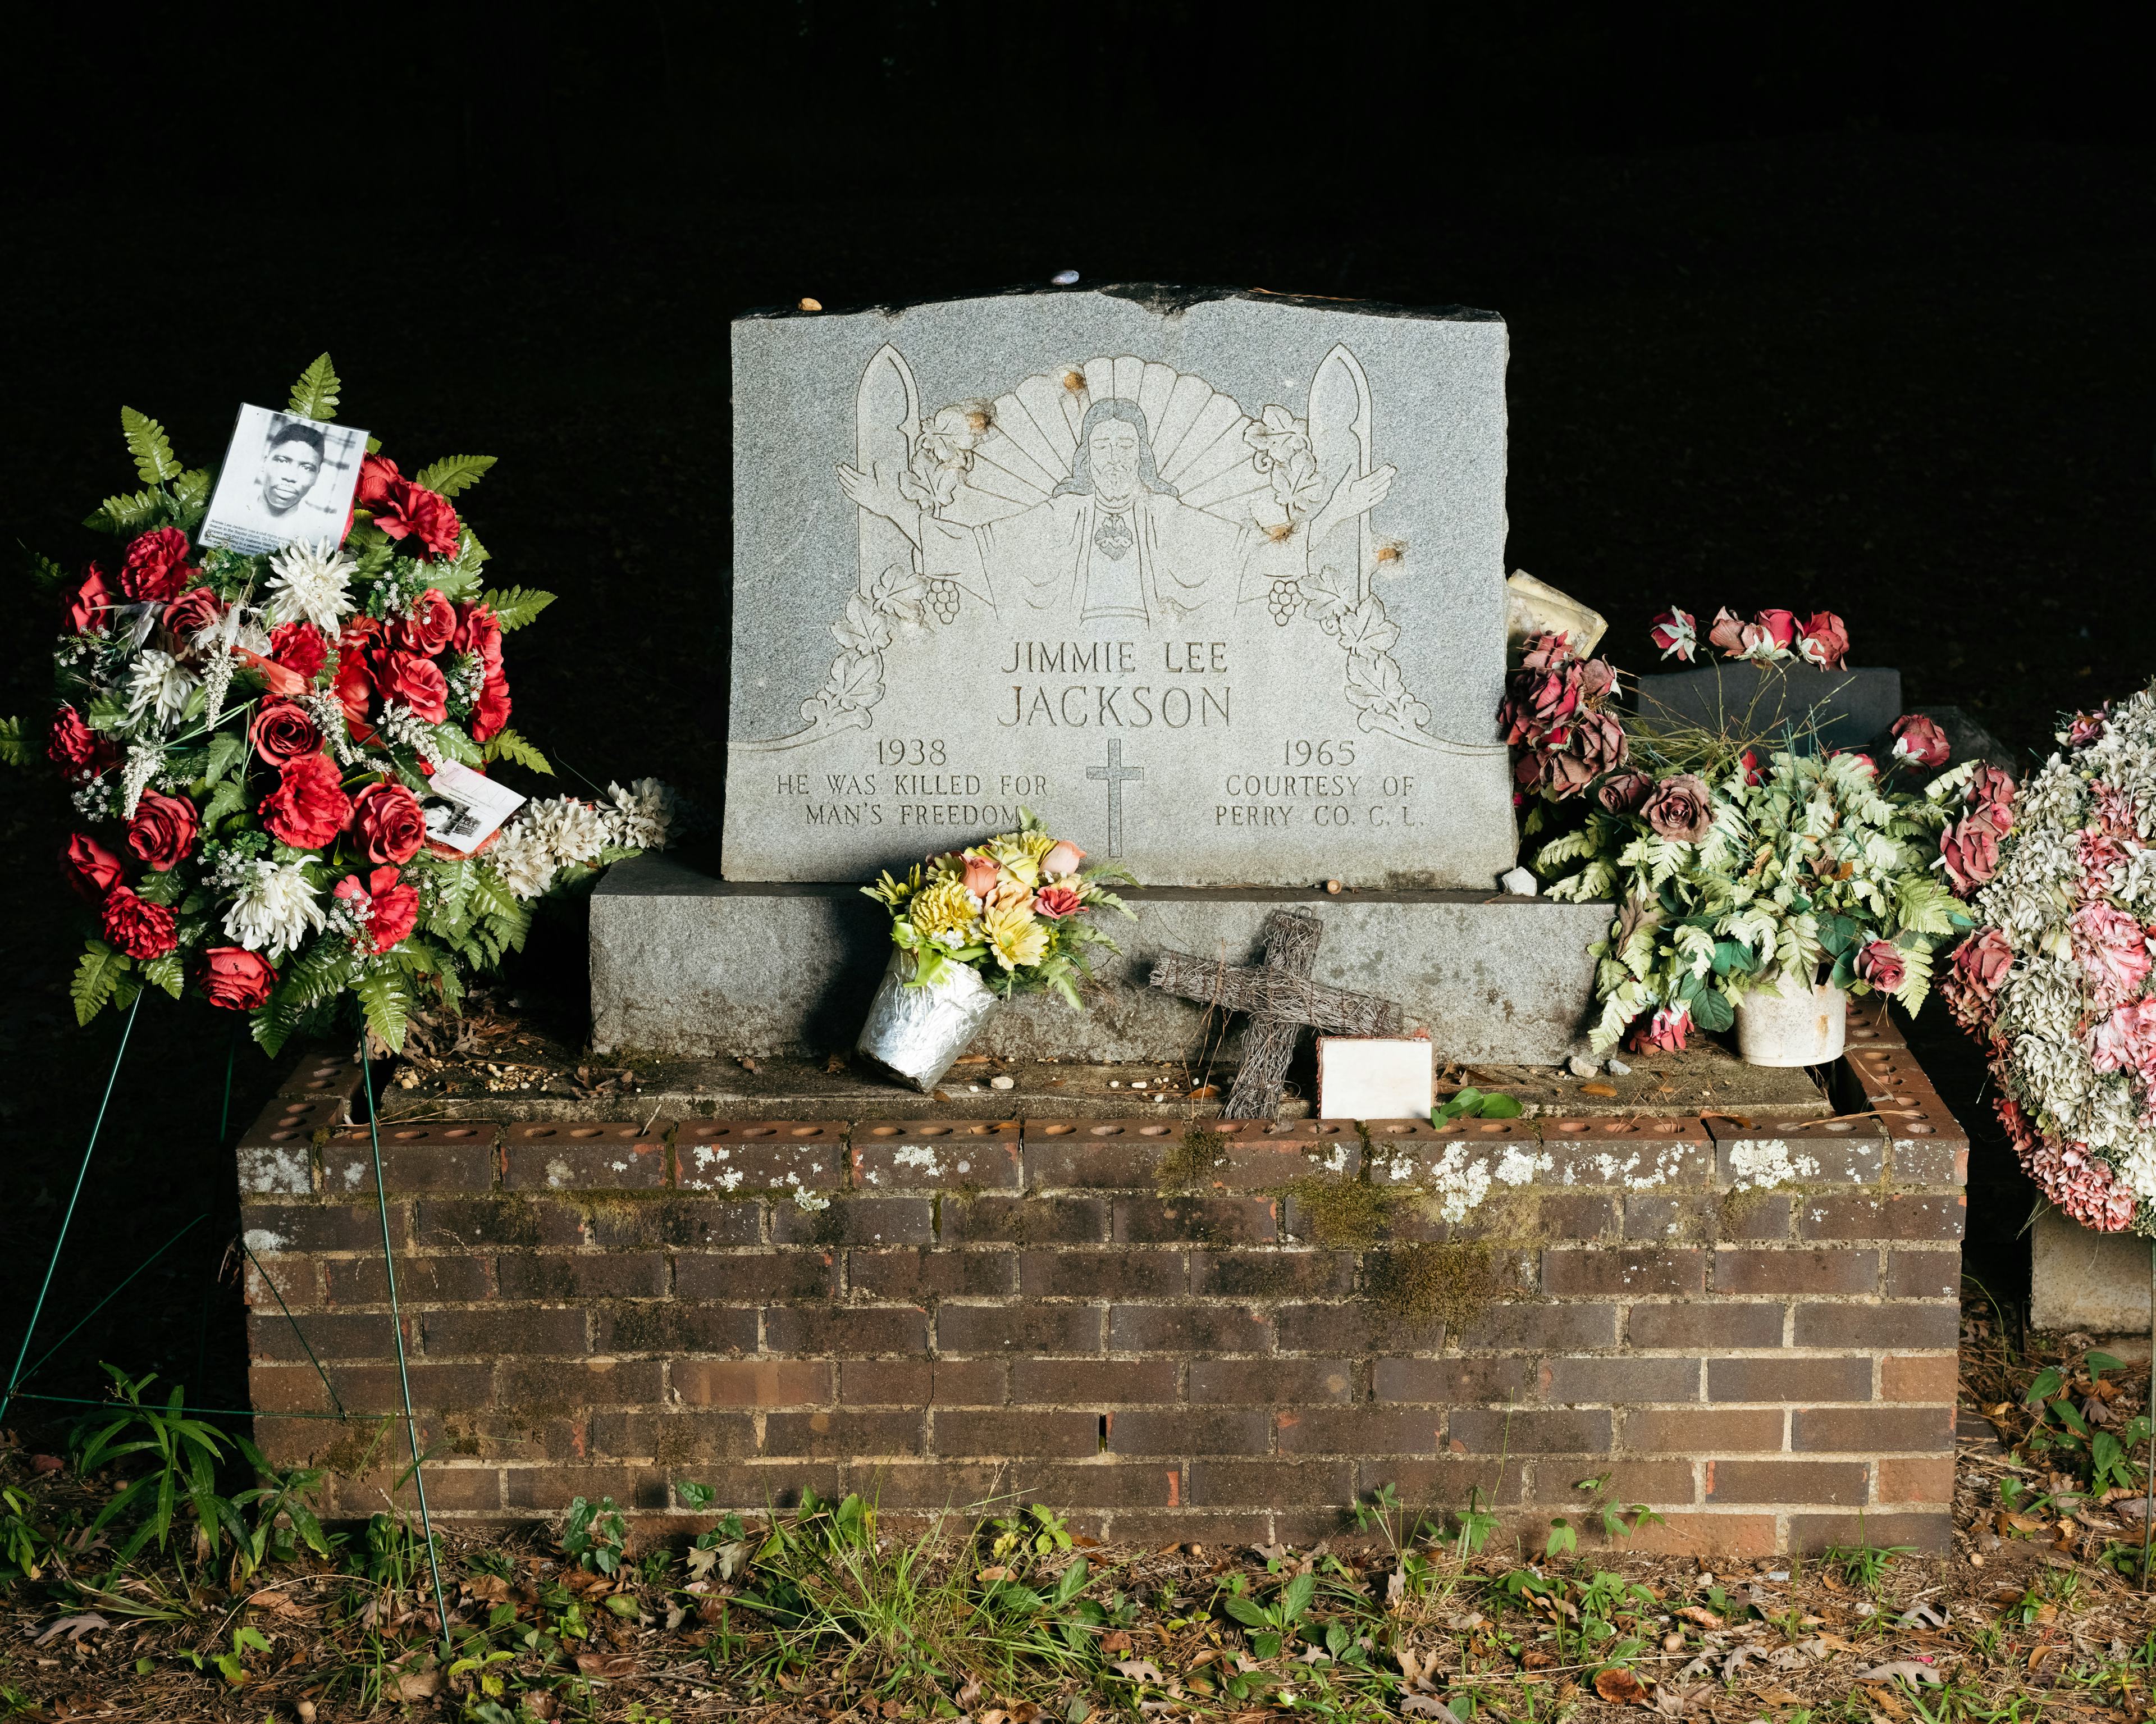 Jimmie Lee Jackson's grave at the Heard Cemetery adorned with flowers.